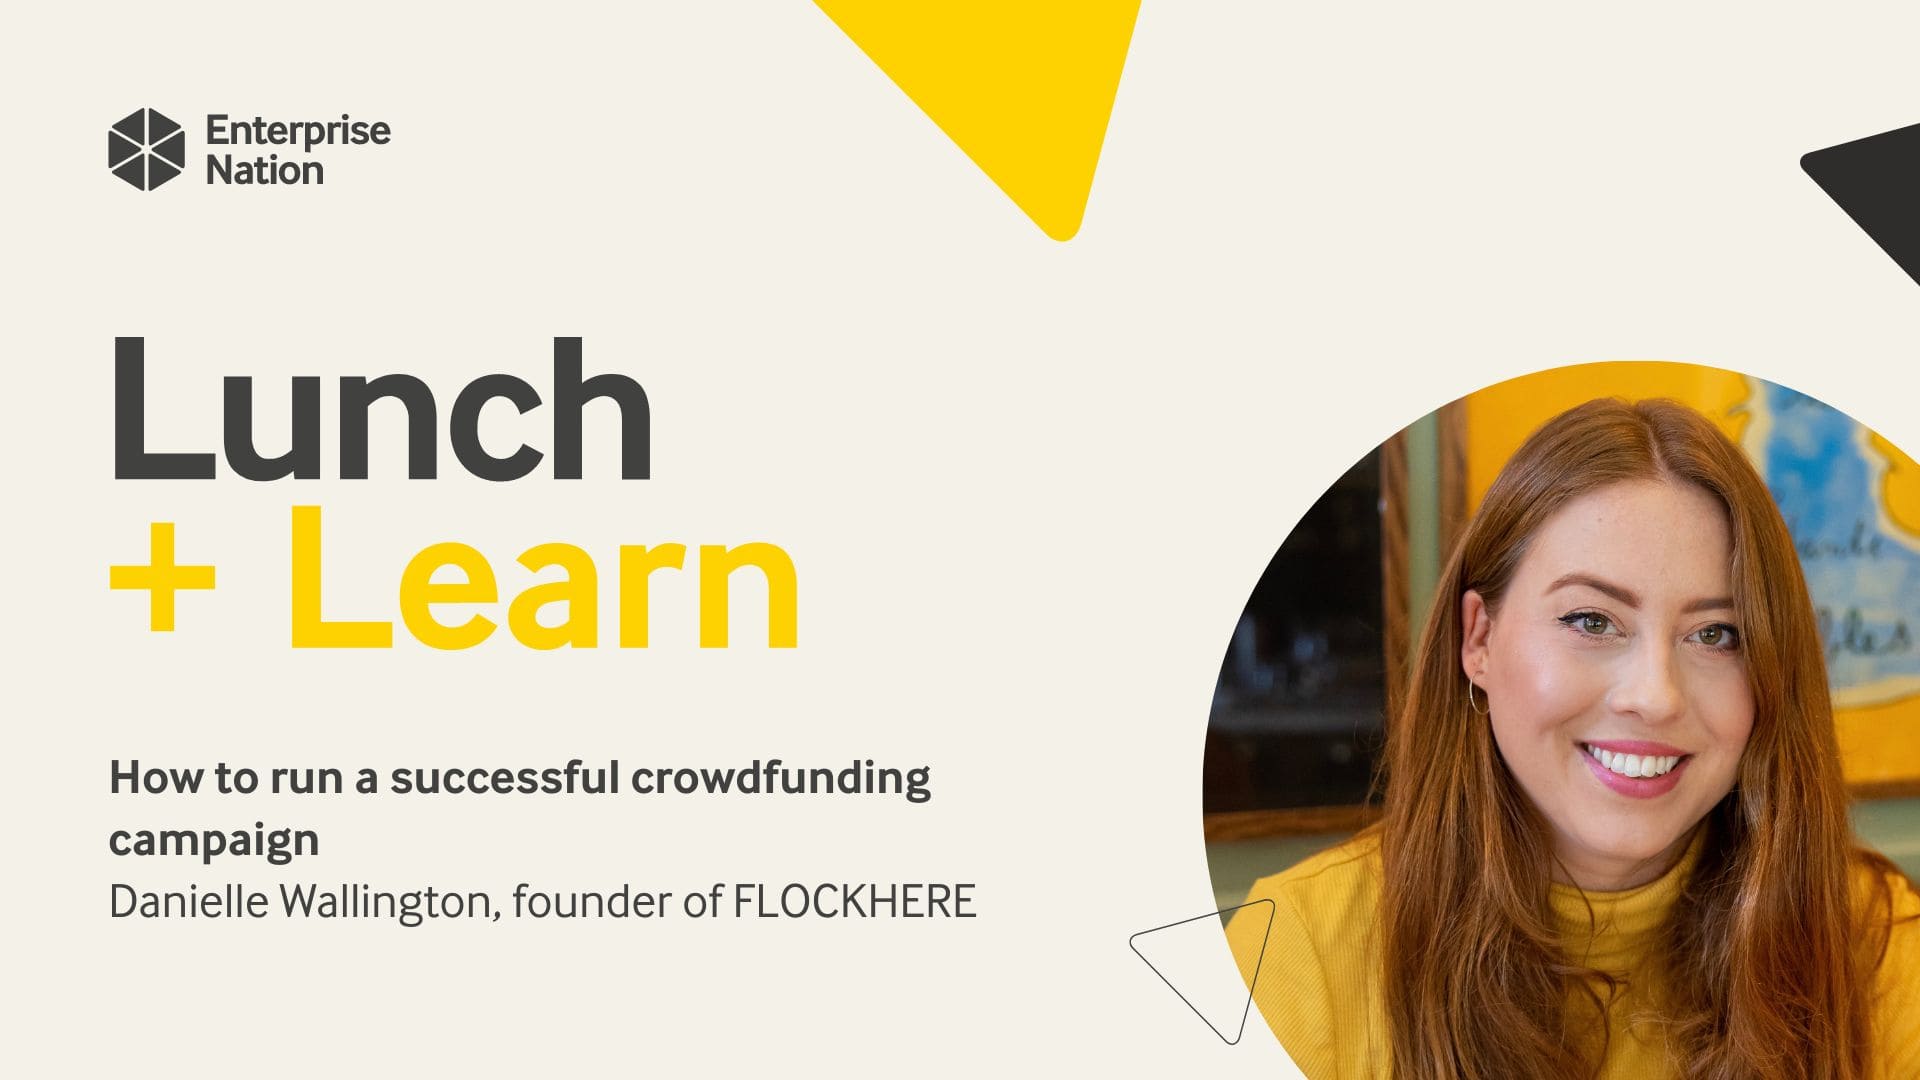 Lunch and Learn: How to run a successful crowdfunding campaign